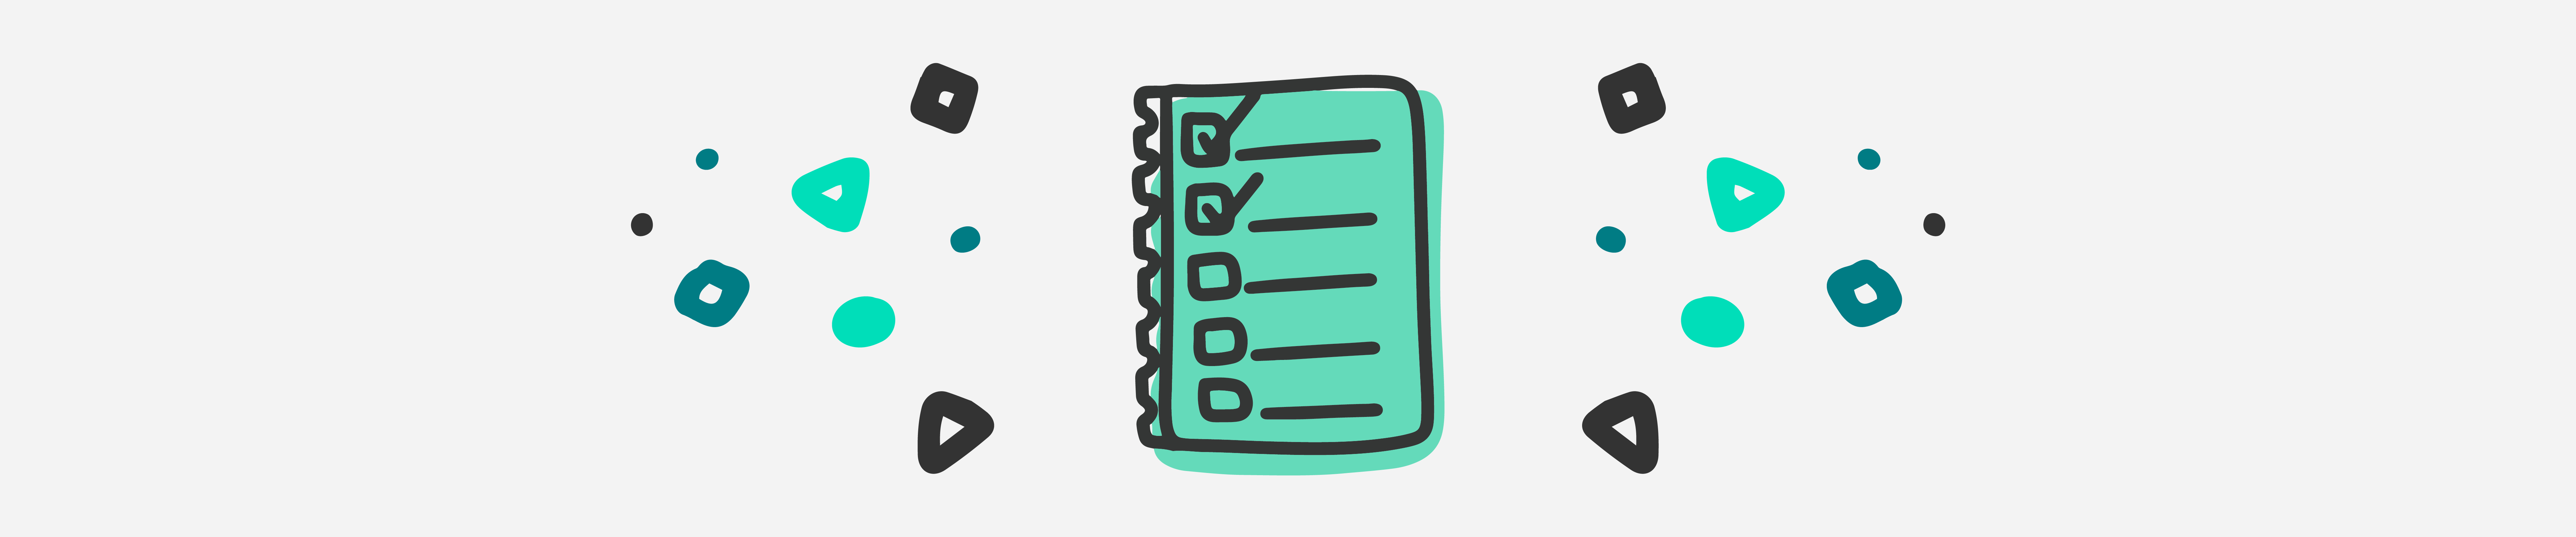 notepad with checklist boxes